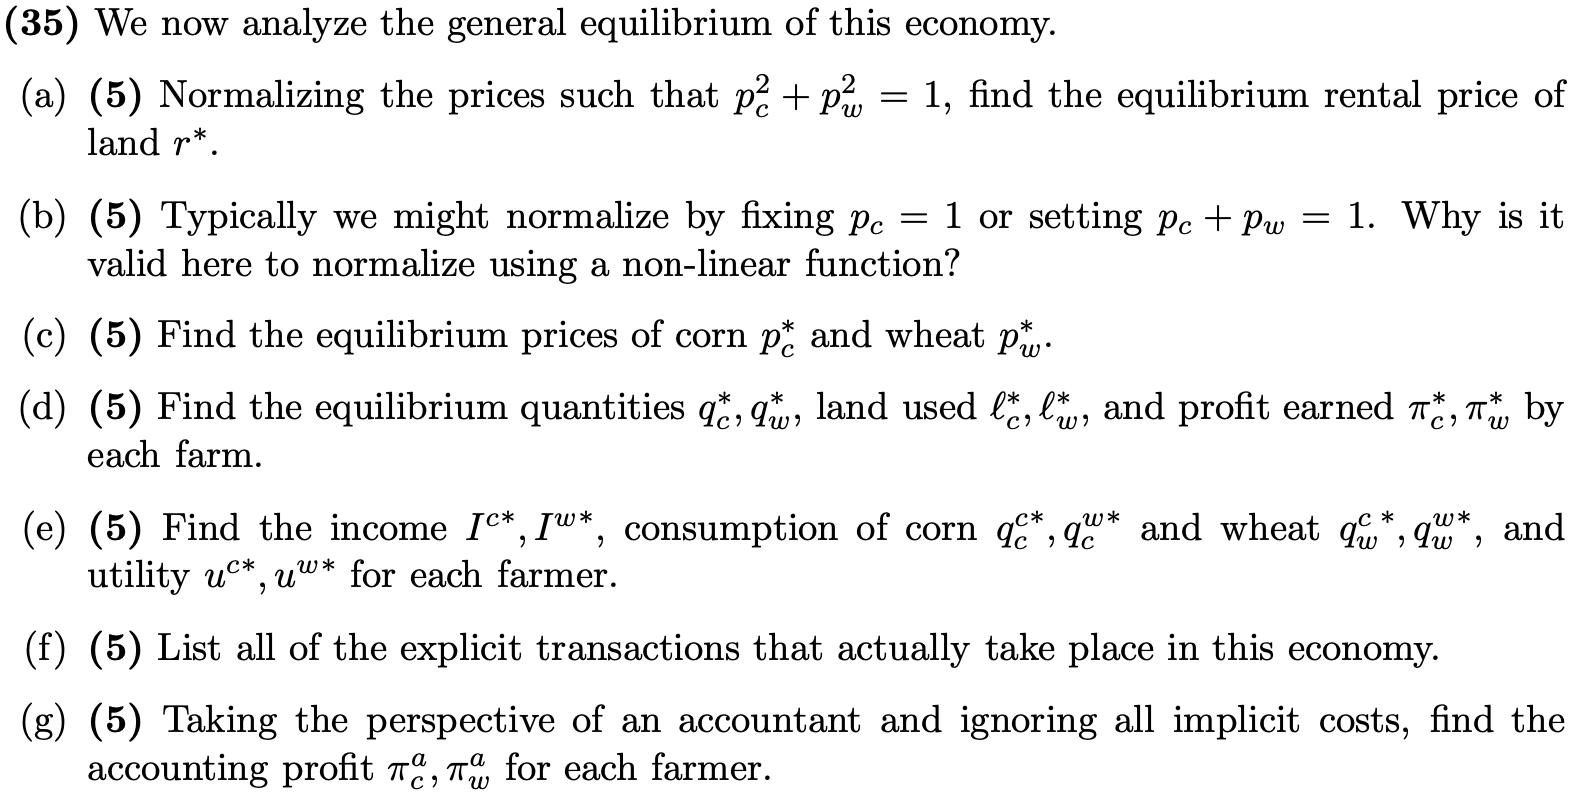 (35) We now analyze the general equilibrium of this economy. (a) (5) Normalizing the prices such that \( p_{c}^{2}+p_{w}^{2}=